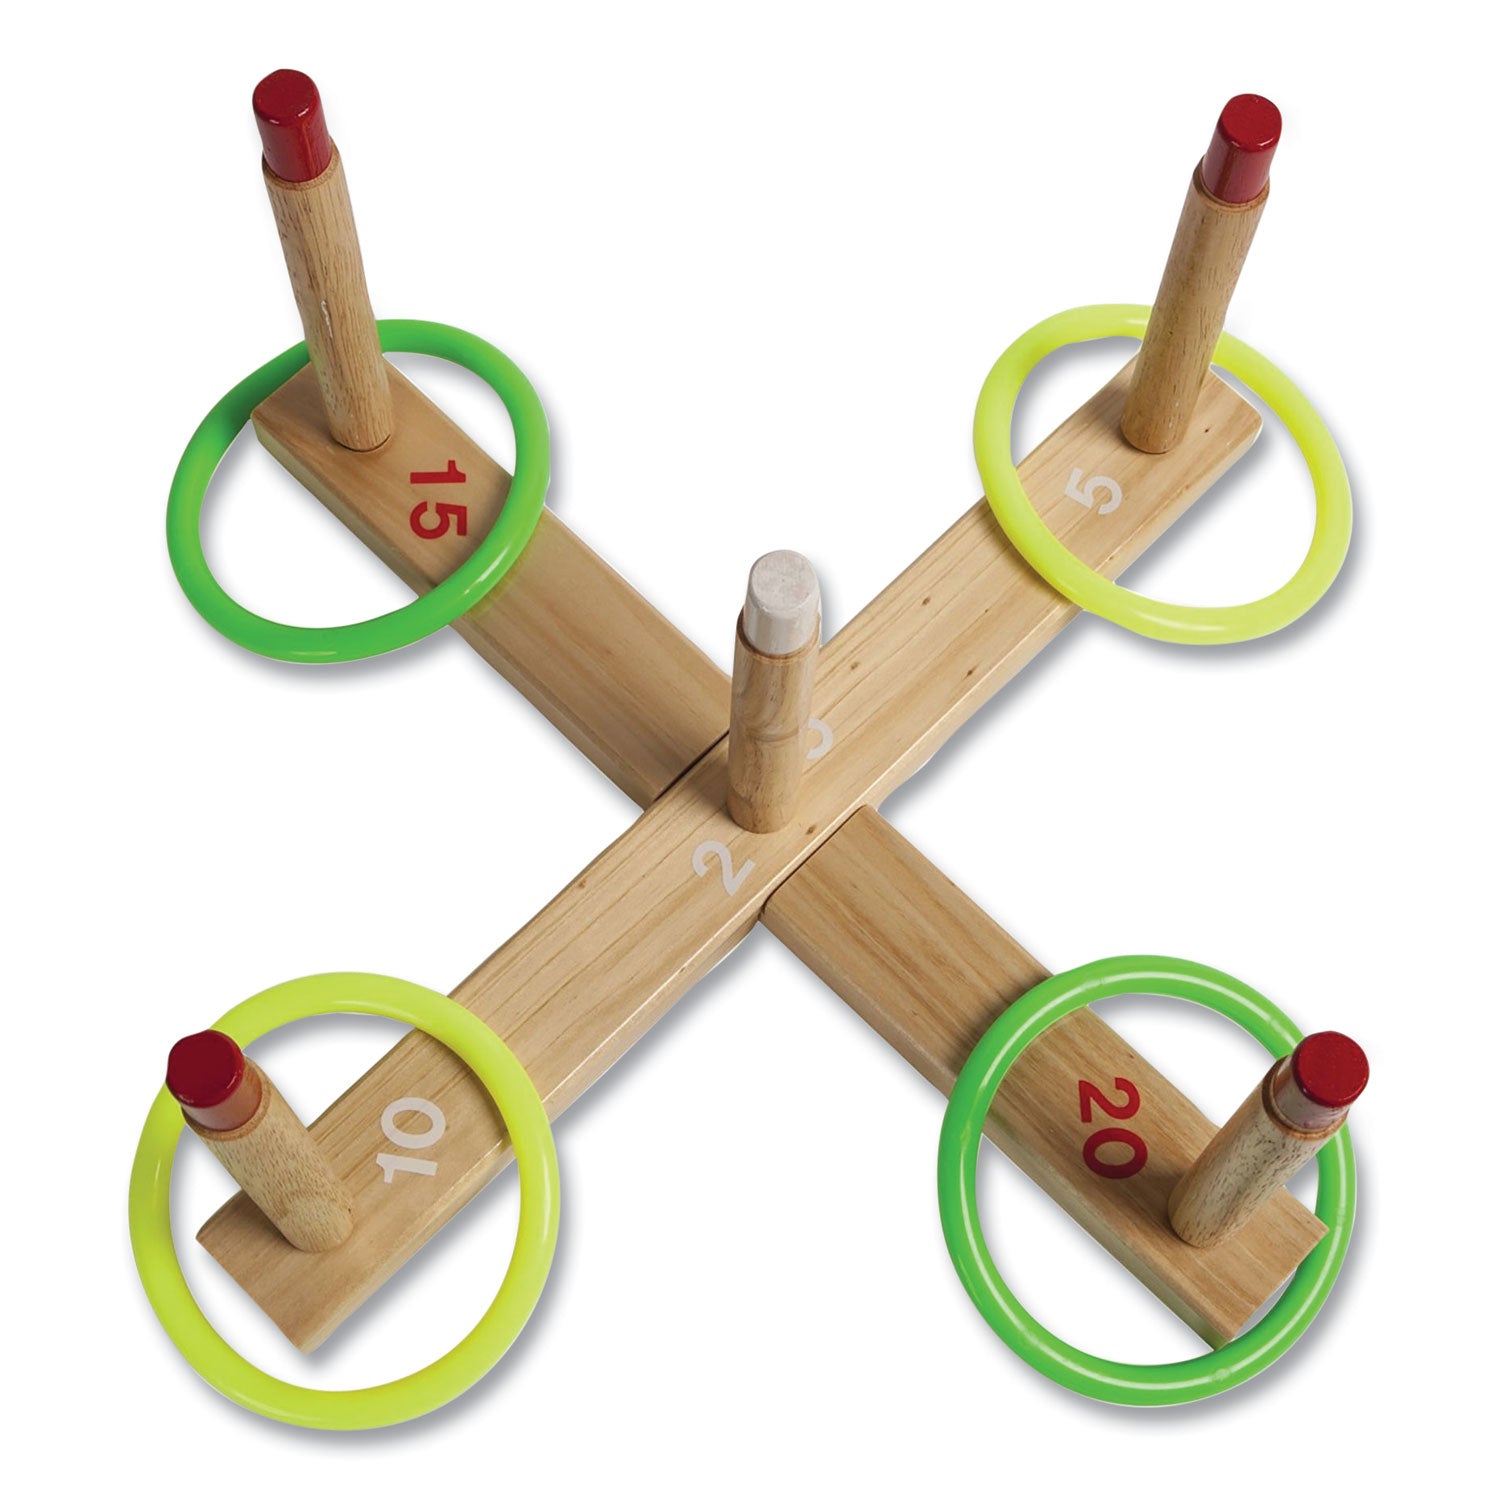 Ring Toss Set, Plastic/Wood, Assorted Colors, 5 Pegs, 4 Rings - 